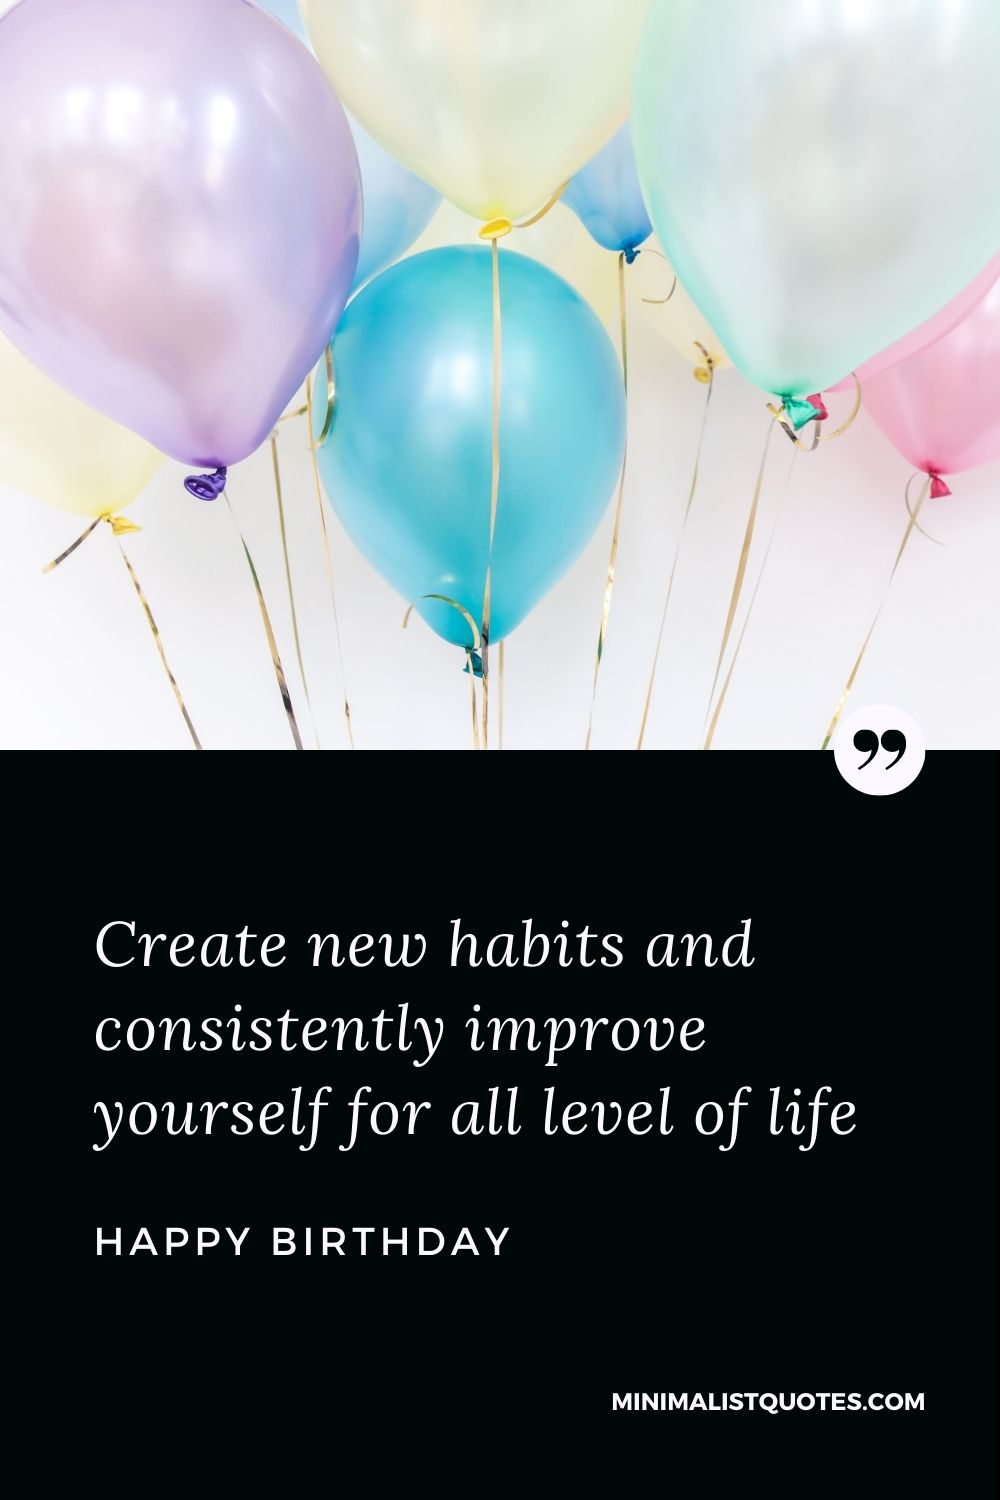 Happy Birthday Wishes - Create new habits and consistently improve yourself for all level of life.